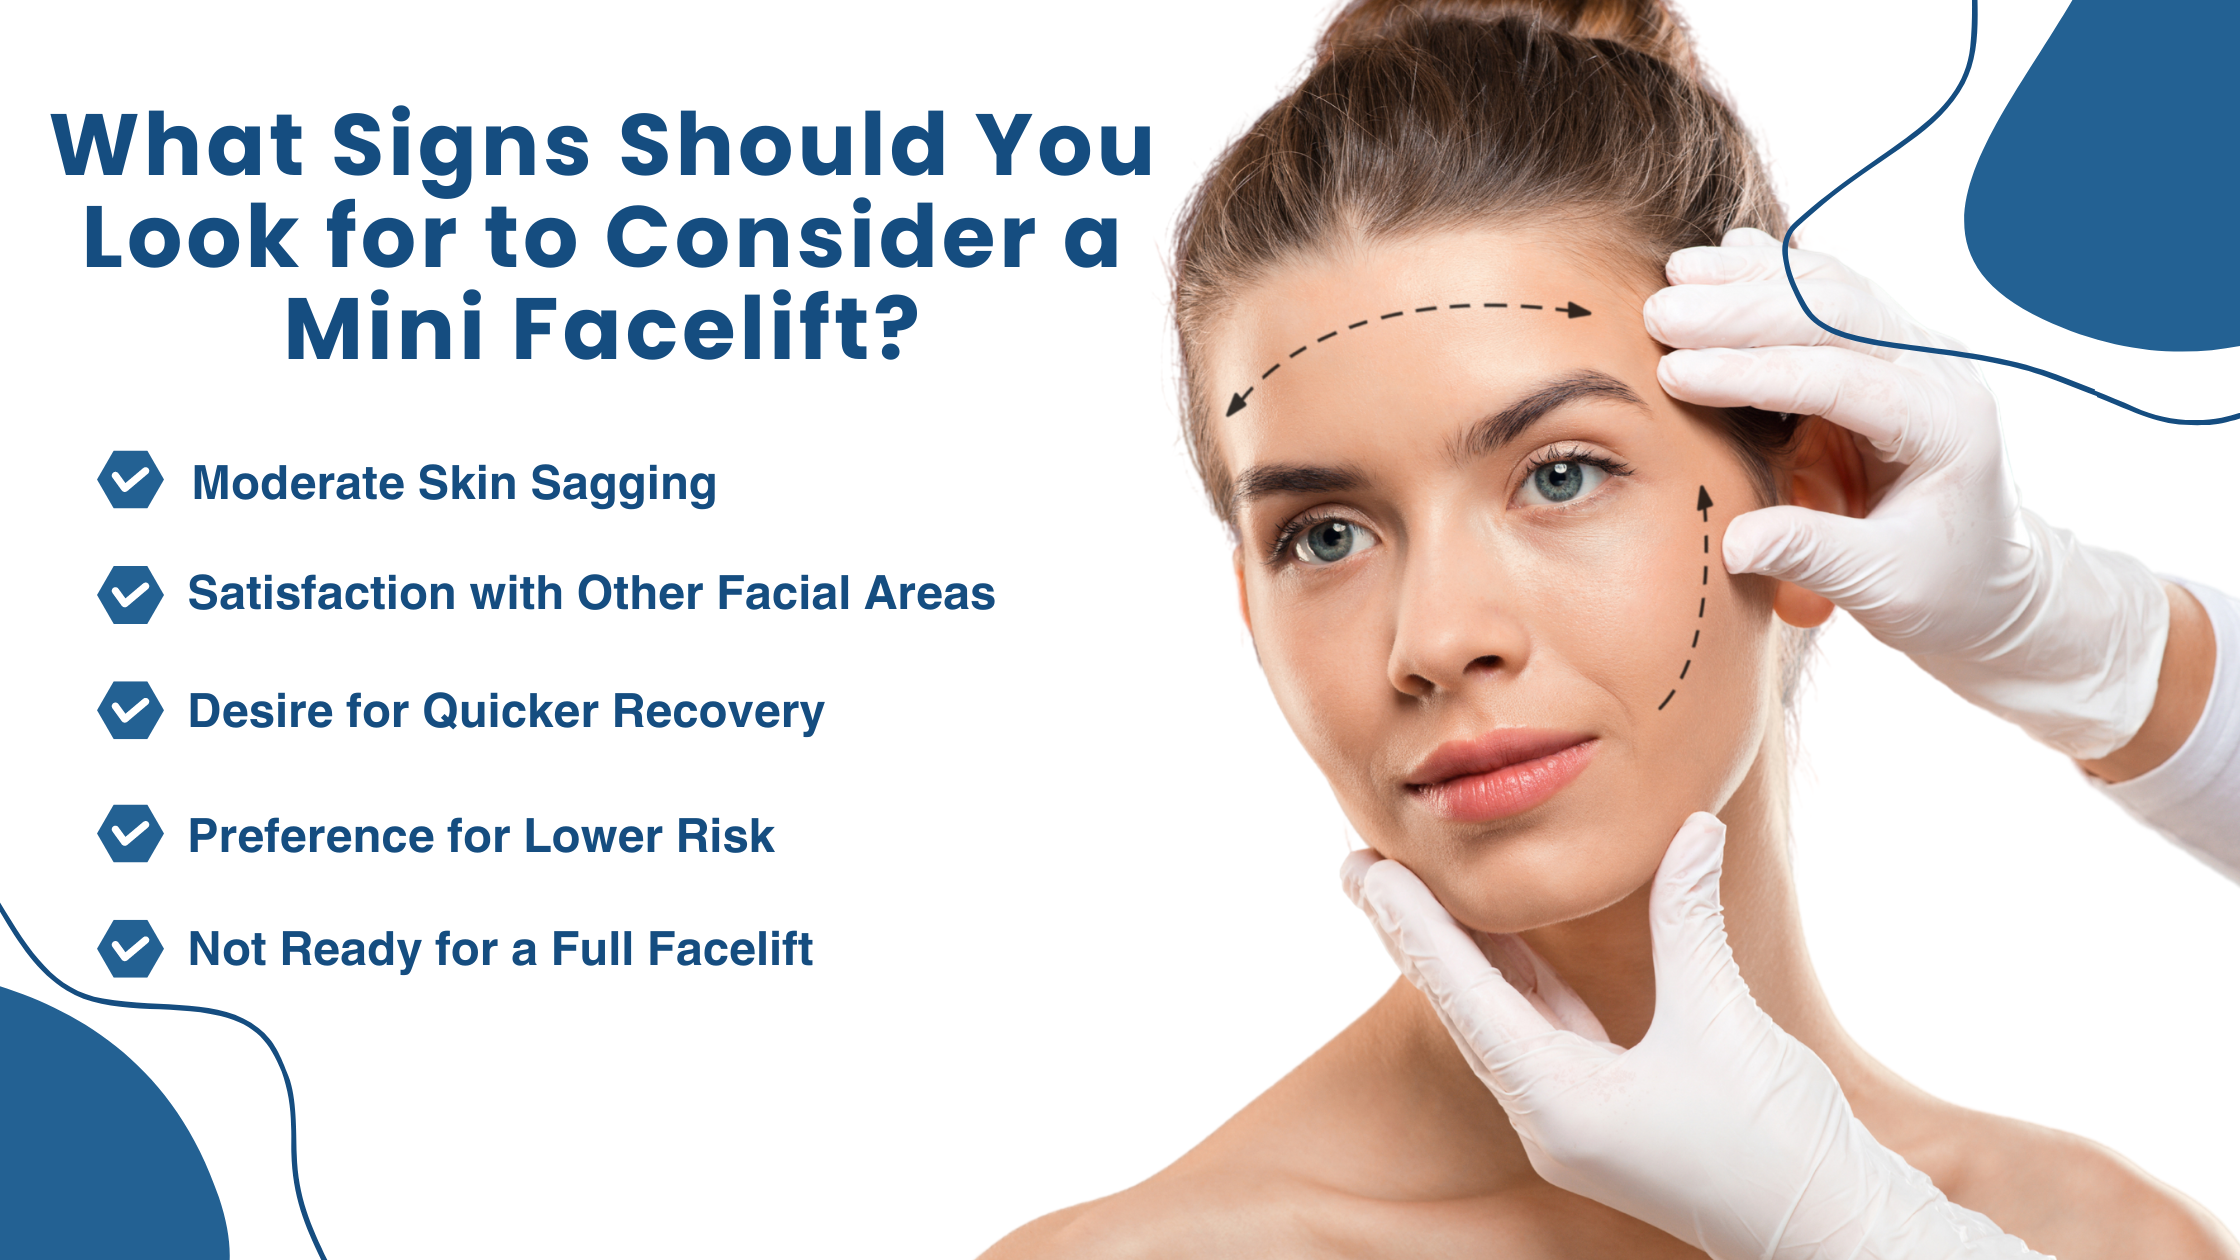 Signs to look for when considering a mini facelift